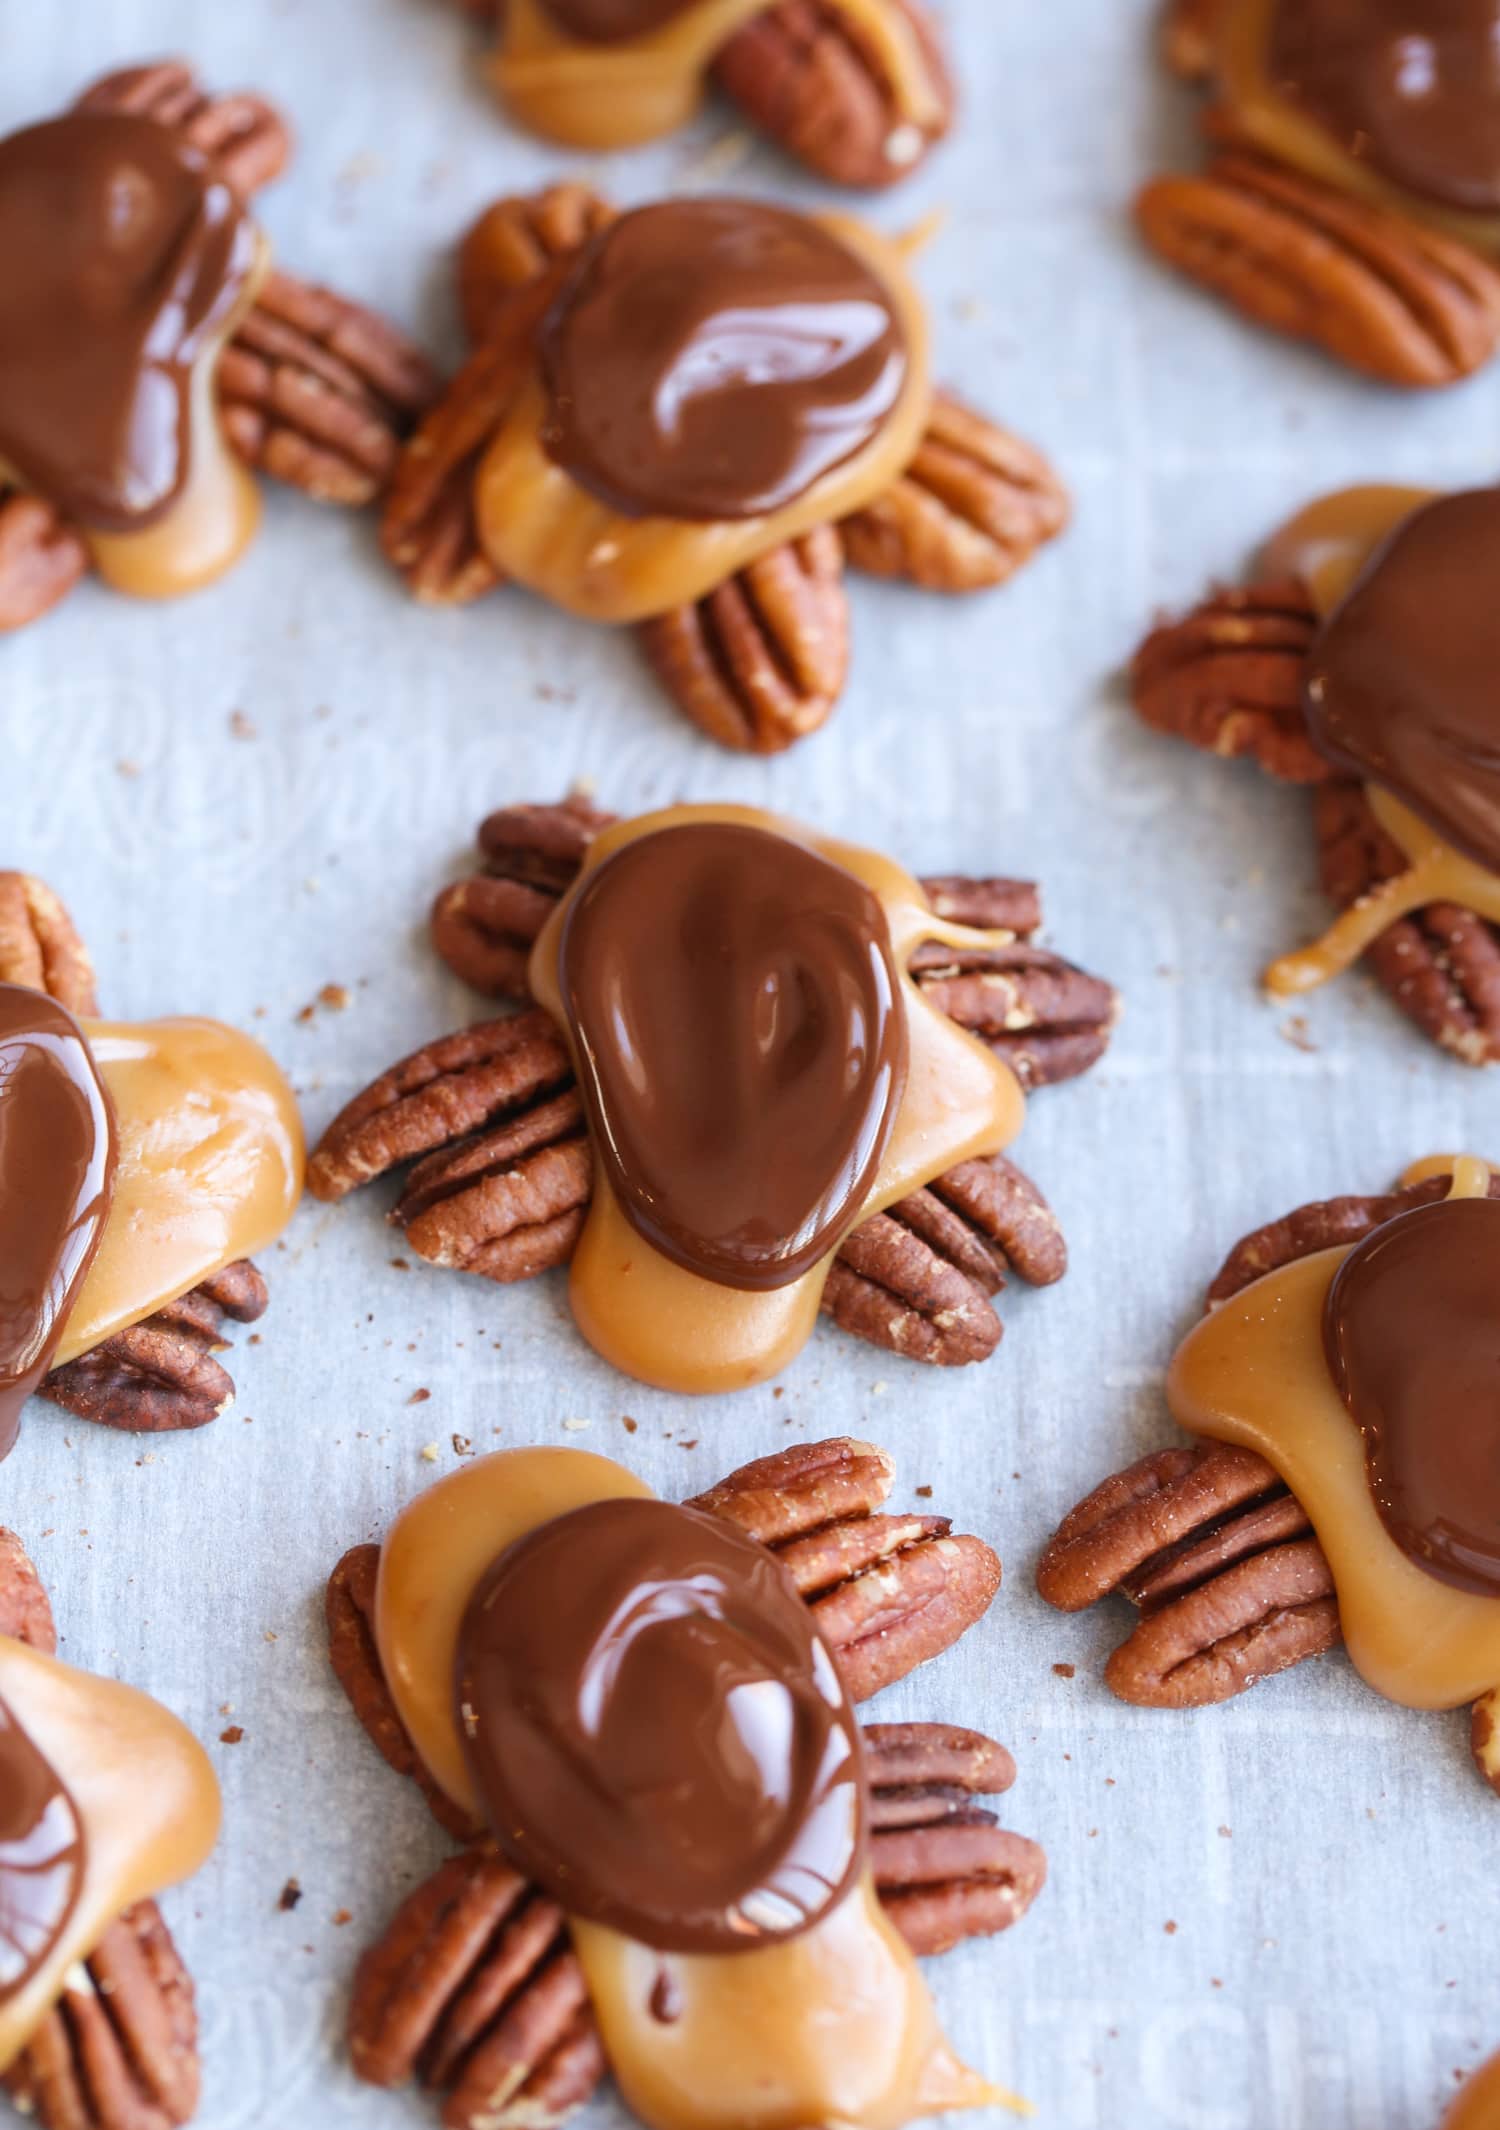 Melted chocolate on caramel pecans.